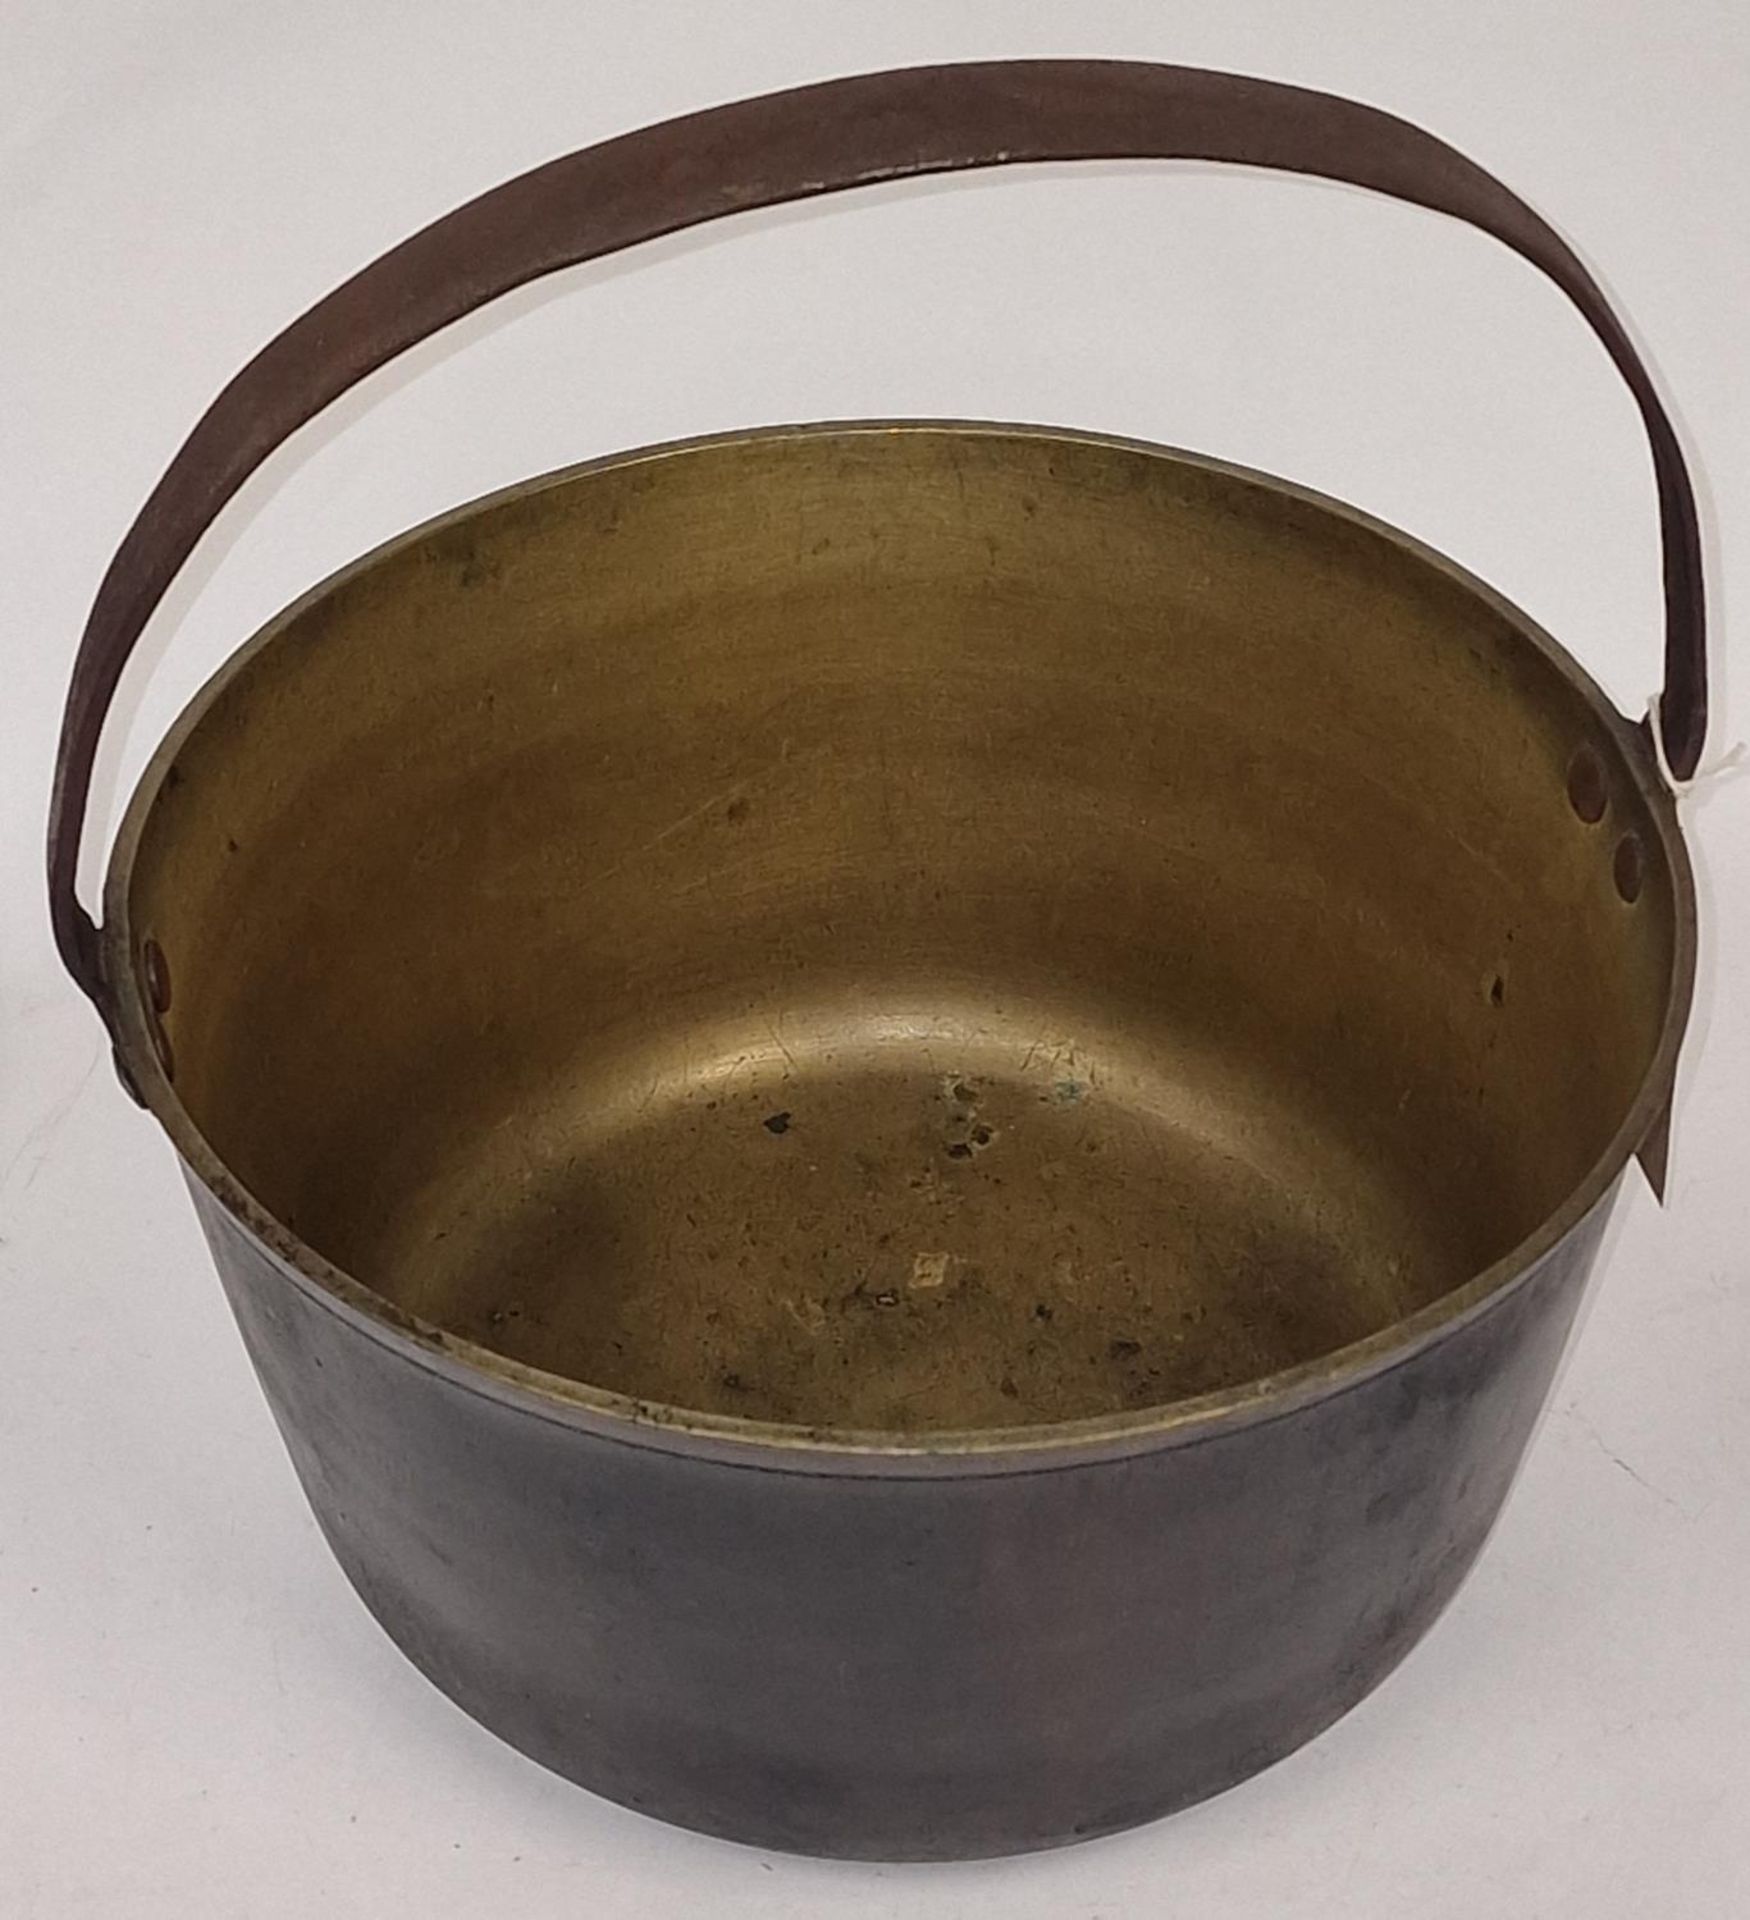 Antique heavy brass English preserving pan with fixed iron loop handle circa 1800's 32x29x15cm. - Image 2 of 3